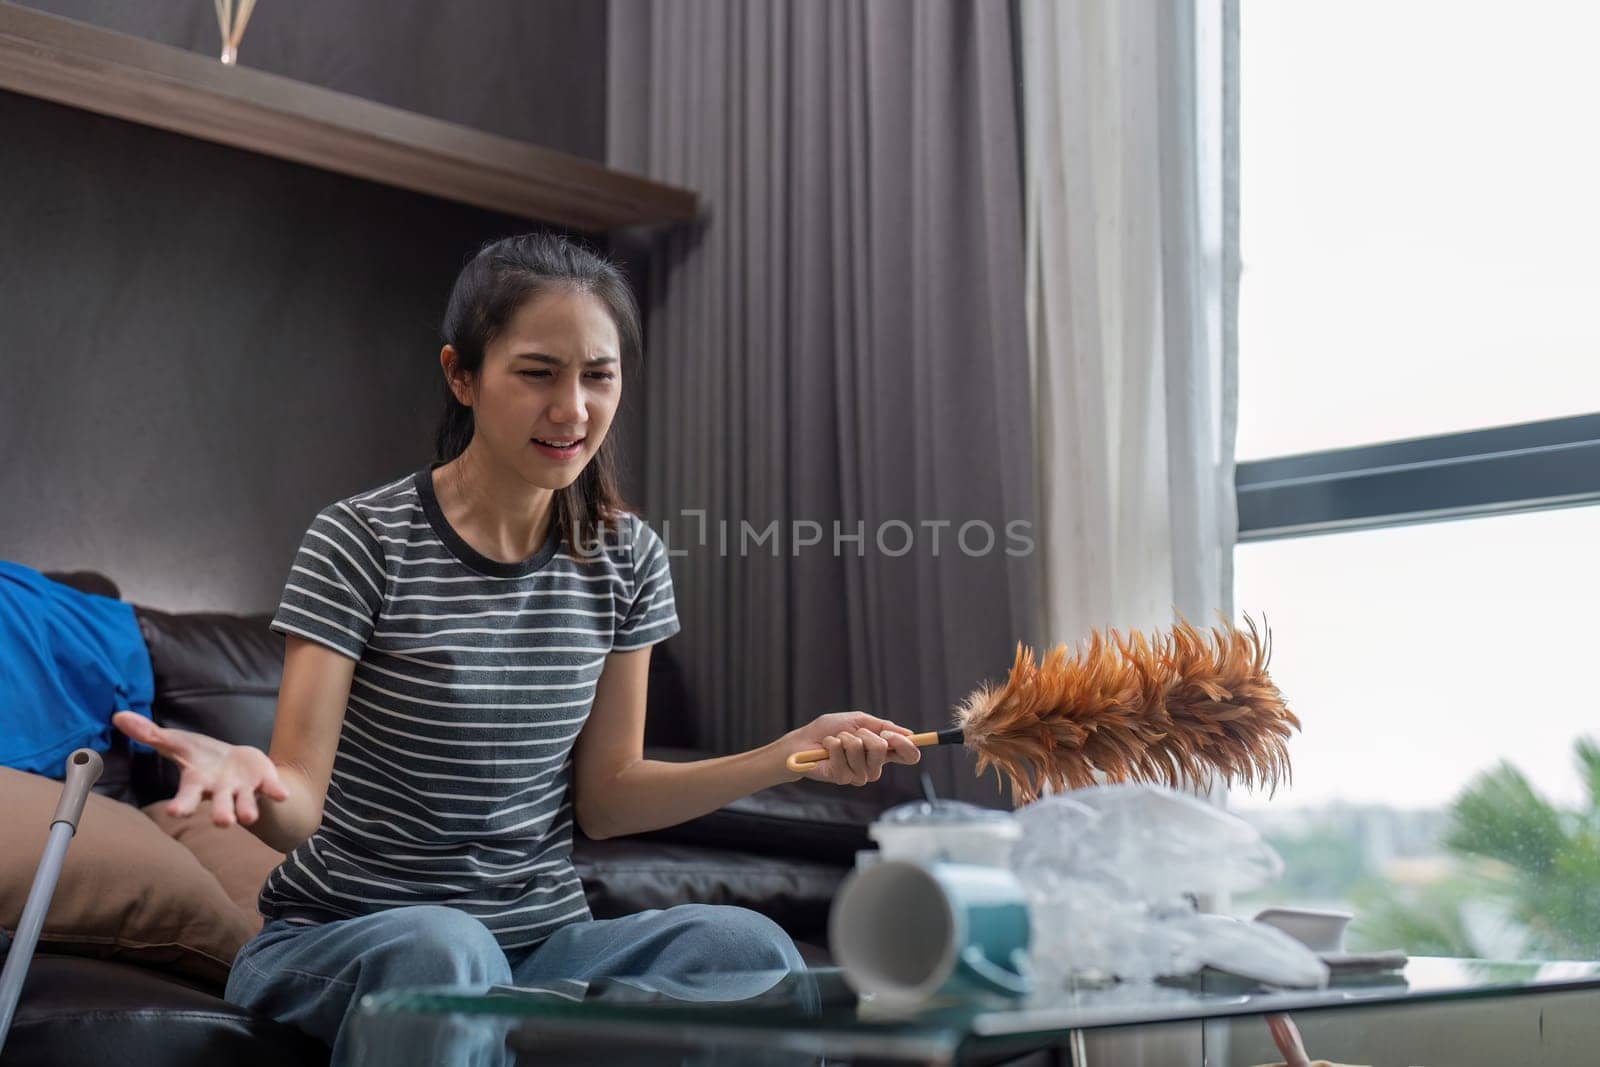 Tired young woman asian in the living room with cleaning products and equipment, housekeeper or overwhelmed girl with housework, stress cleaning, Housework concept by nateemee